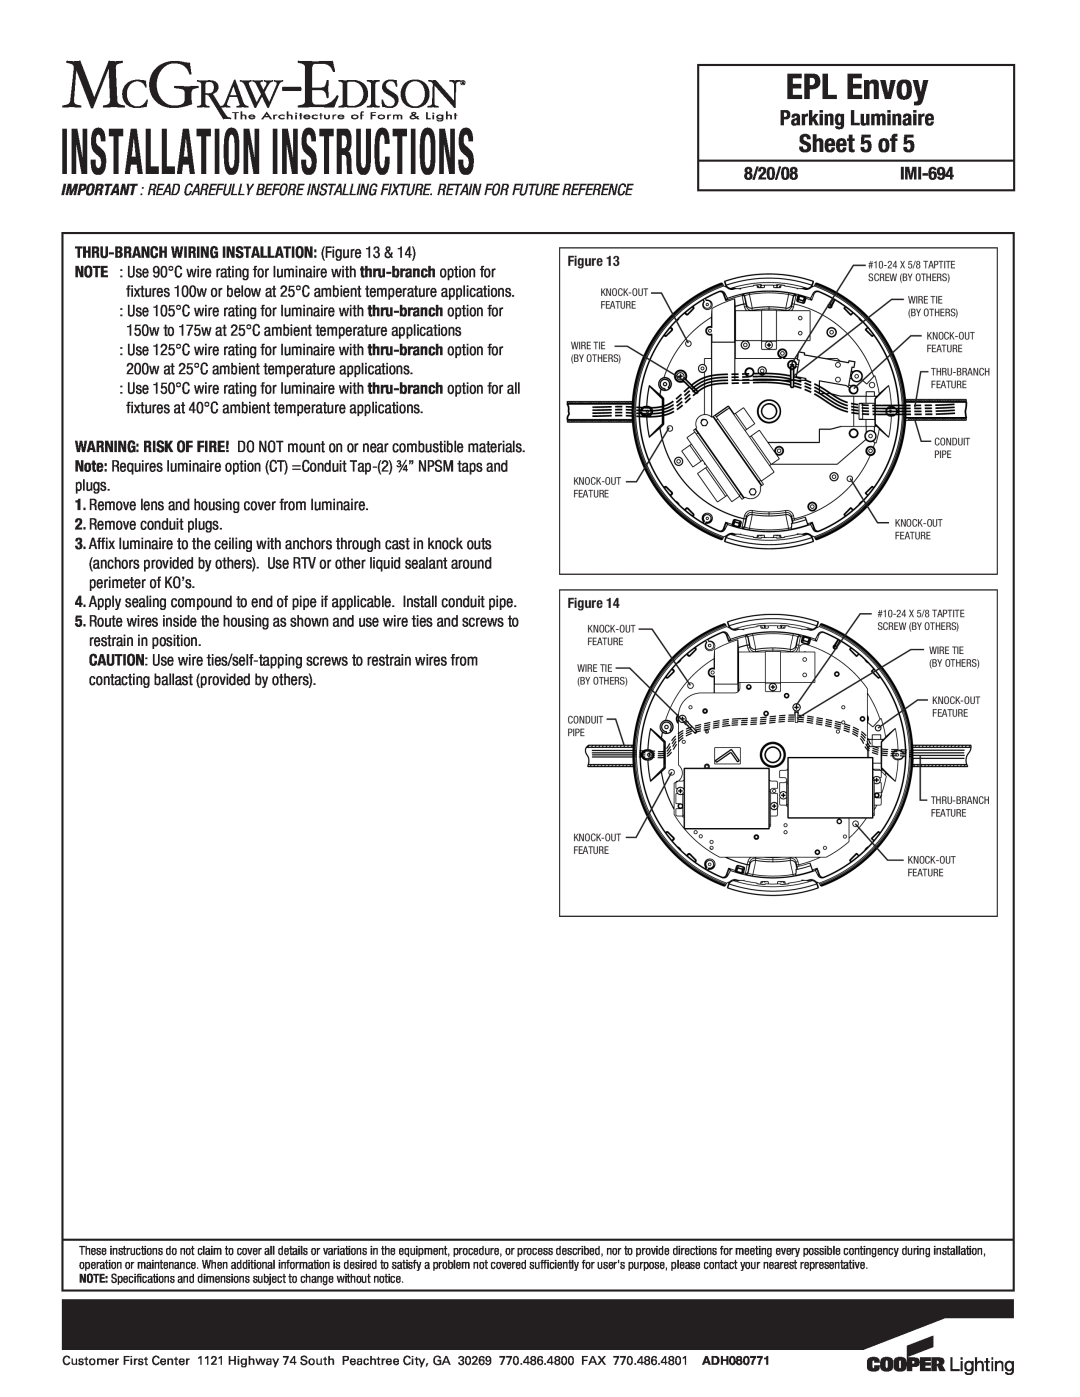 Cooper Lighting specifications Sheet 5 of, Installation Instructions, EPL Envoy, Parking Luminaire, 8/20/08IMI-694 